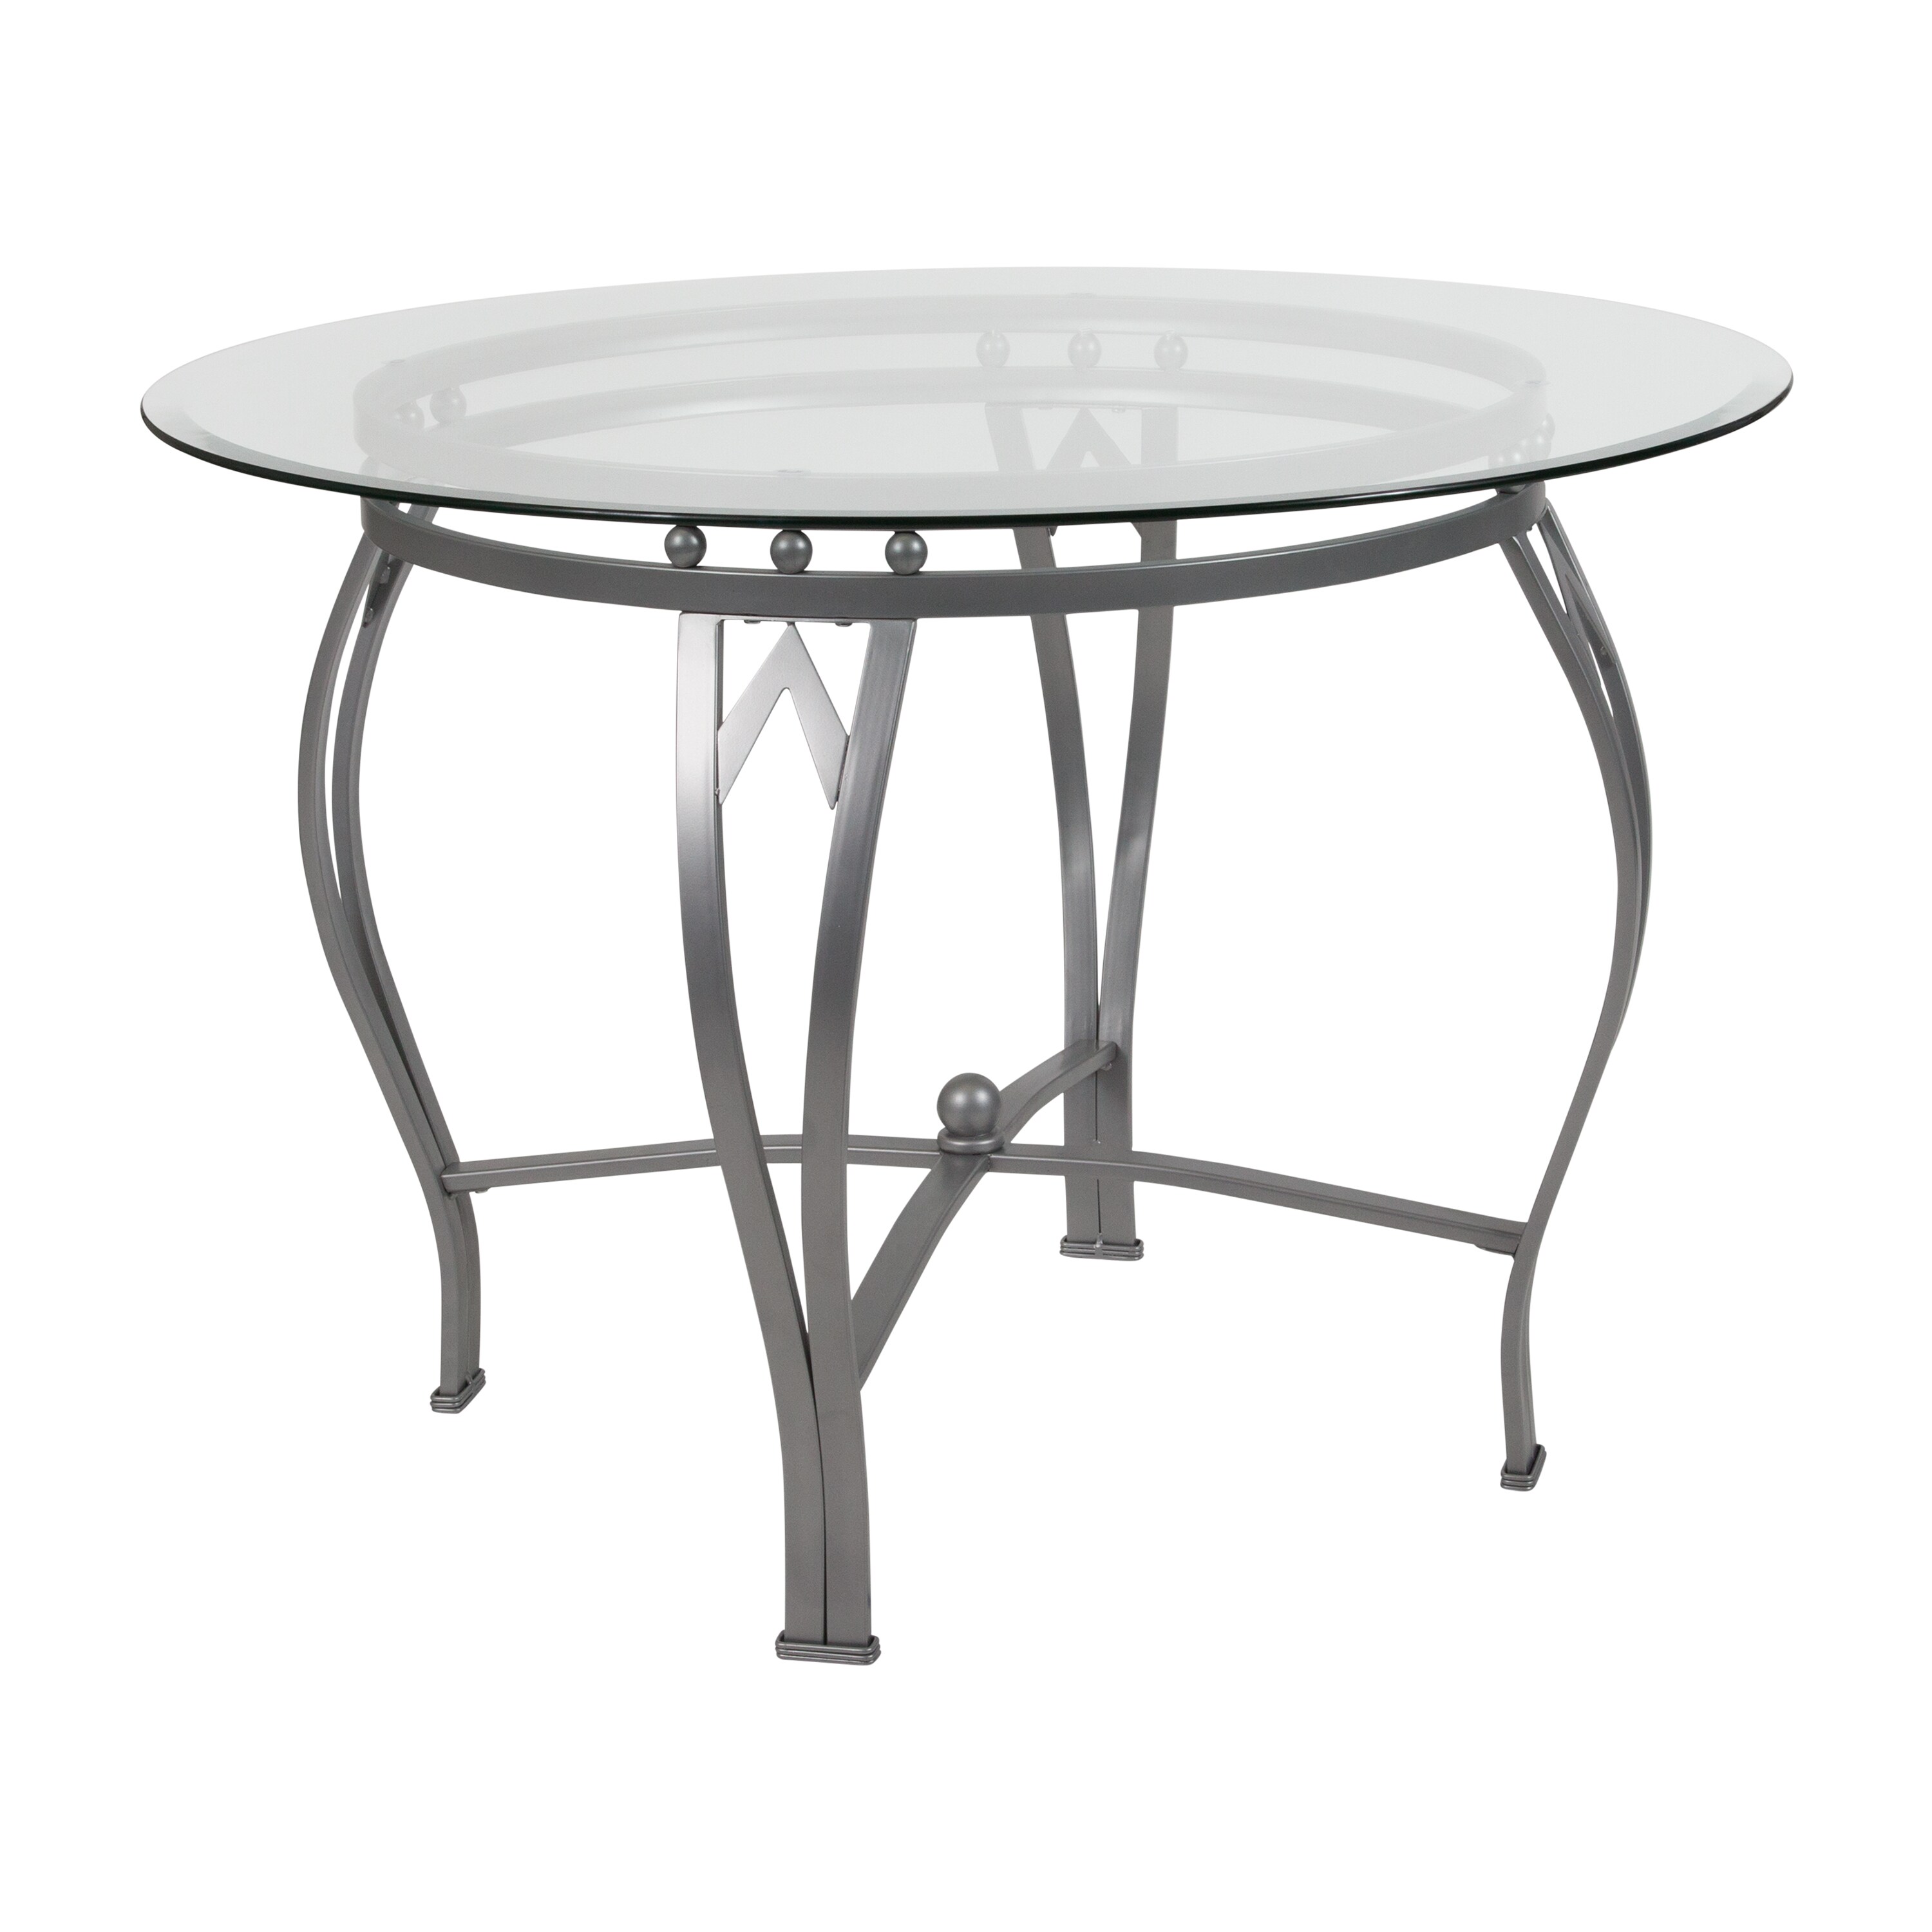 Clear Tempered Glass Round Table Top Protective Cover for Home Kitchen Tables